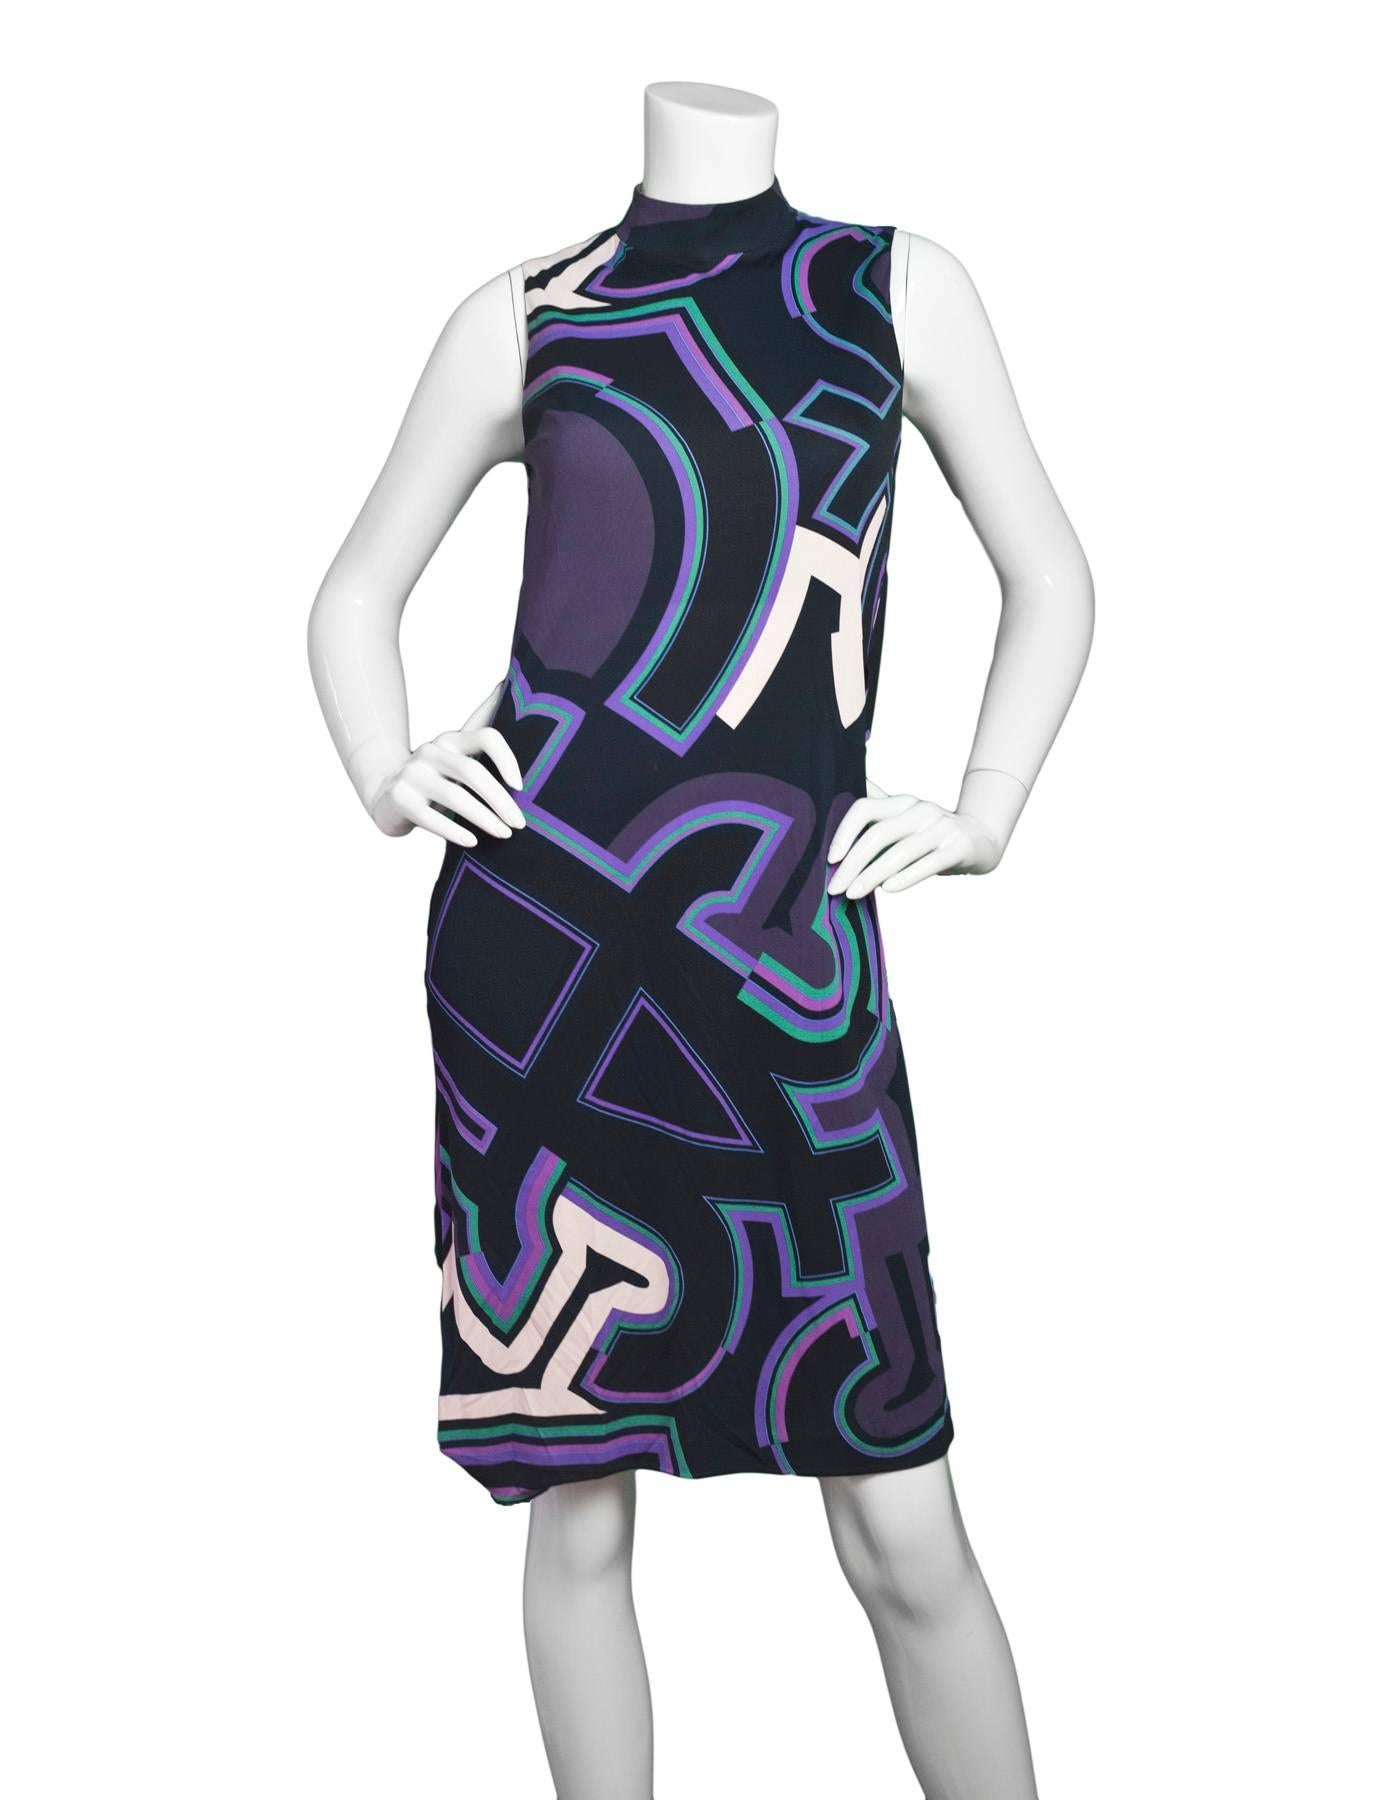 Emilio Pucci Black & Purple Sleeveless Dress Sz US4
Features belt loops

Made In: Italy
Year Of Production: 2017
Color: Purple, black, green
Composition: 83% Viscose, 17% silk
Lining: Black silk lining under bust
Closure/Opening: Zip closure at